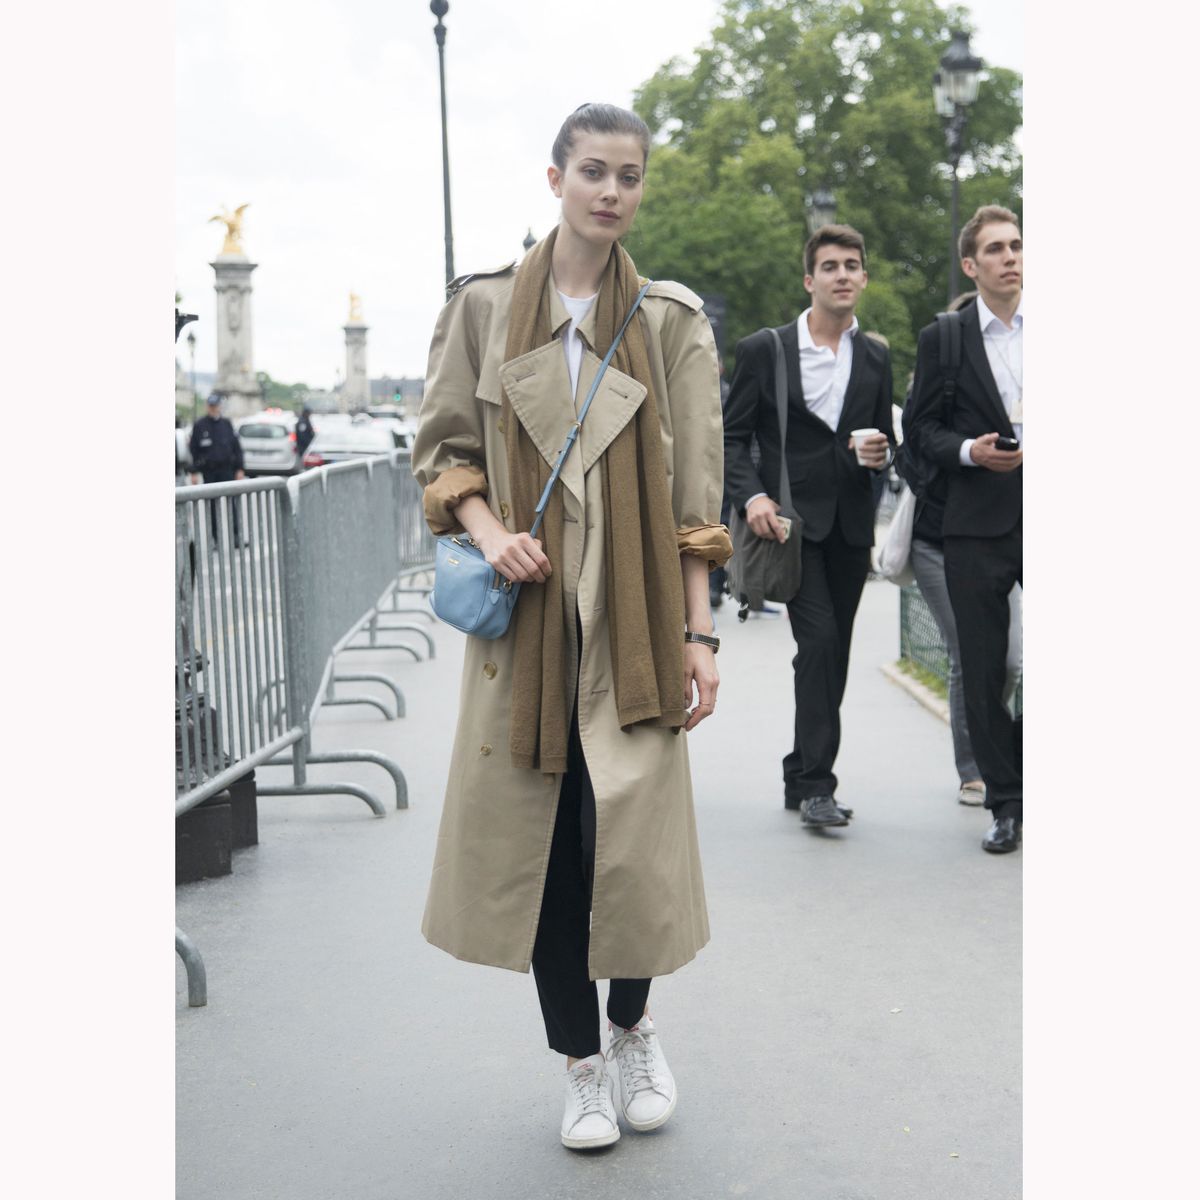 The fashion girl's guide to wearing a trench coat